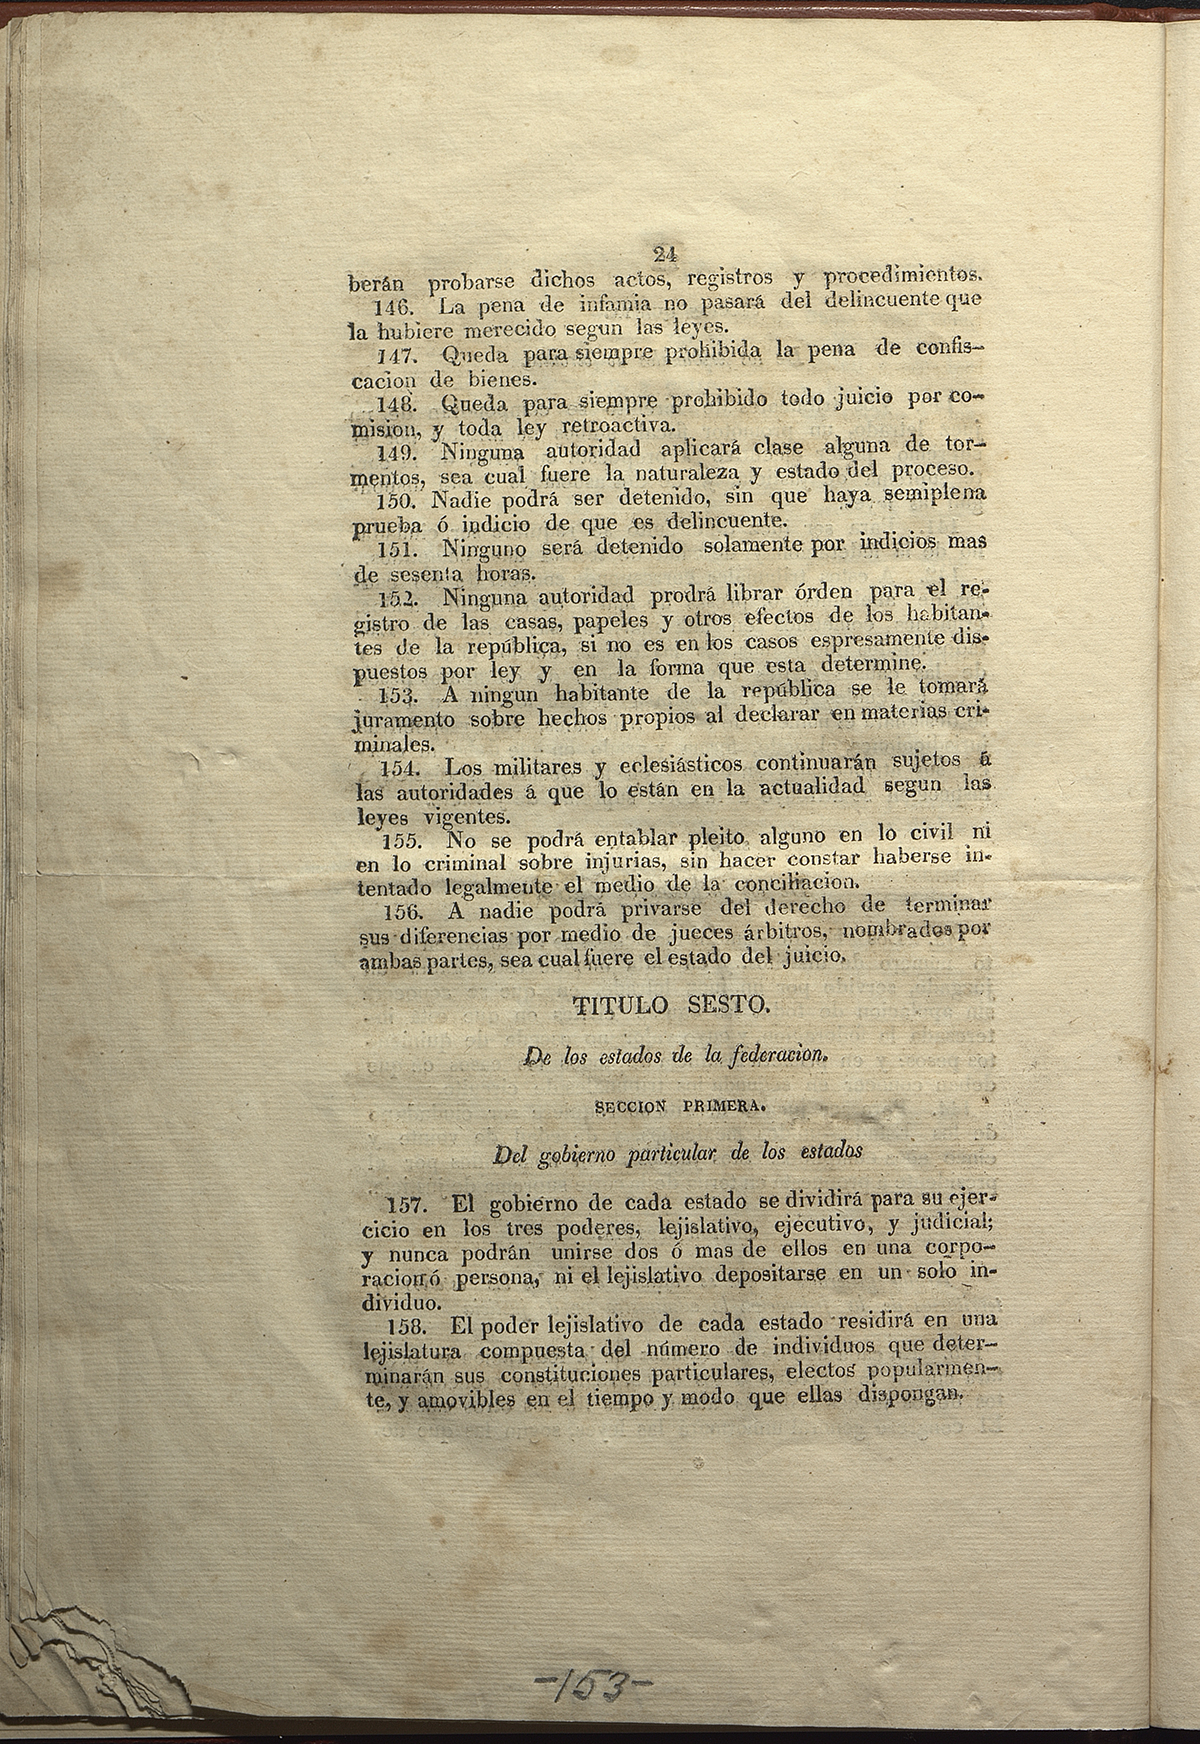 Title VI, Section I, Articles 157-158